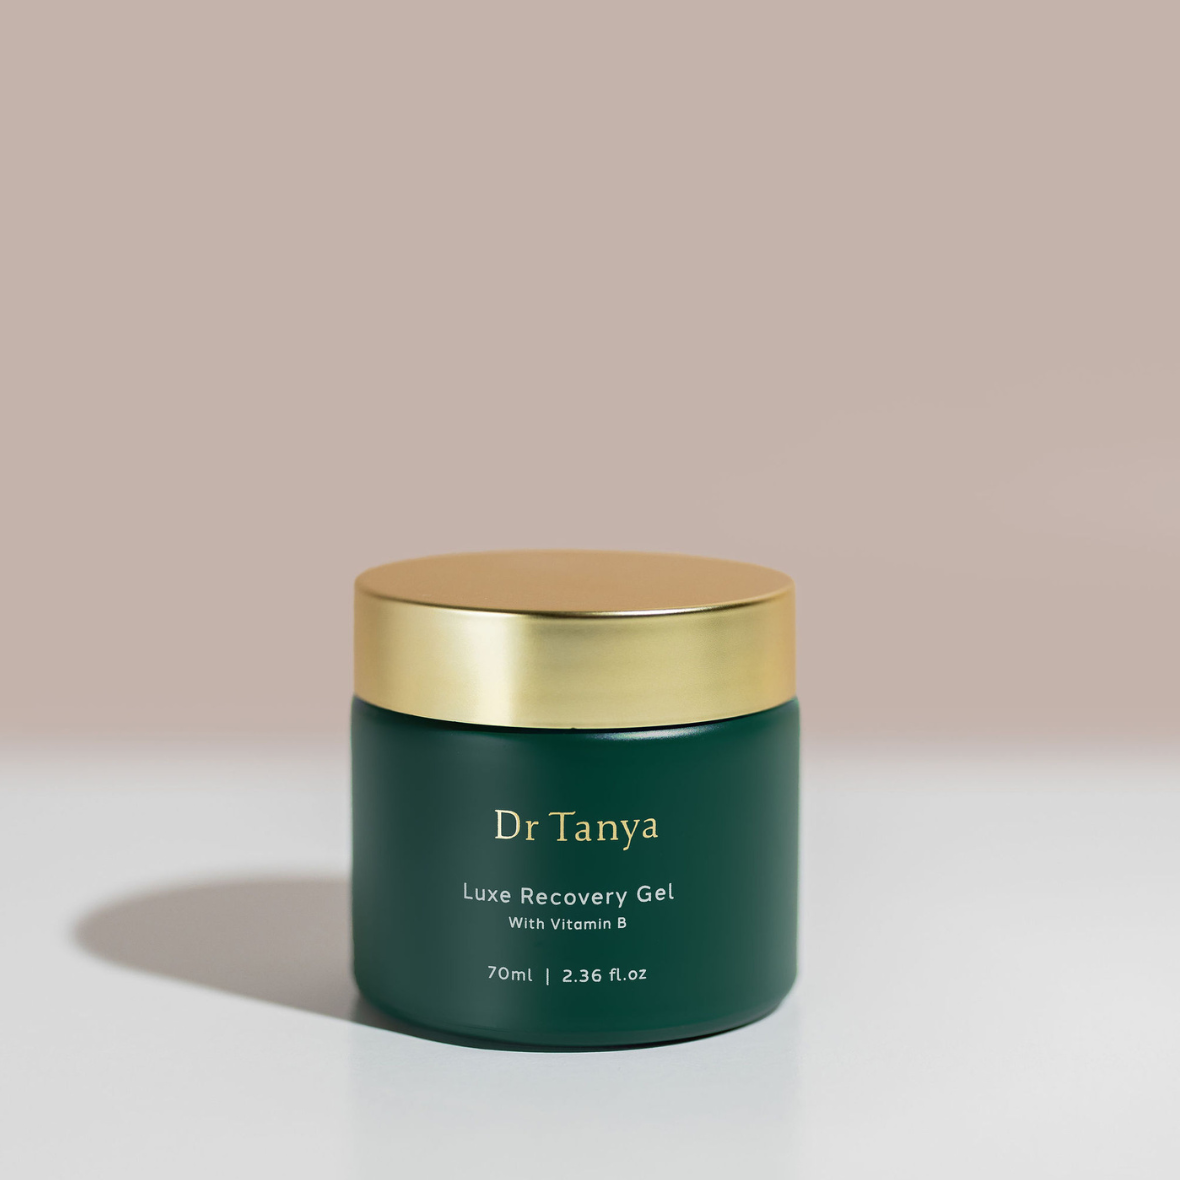 A green coloured round pot of facial skincare gel with a gold lid